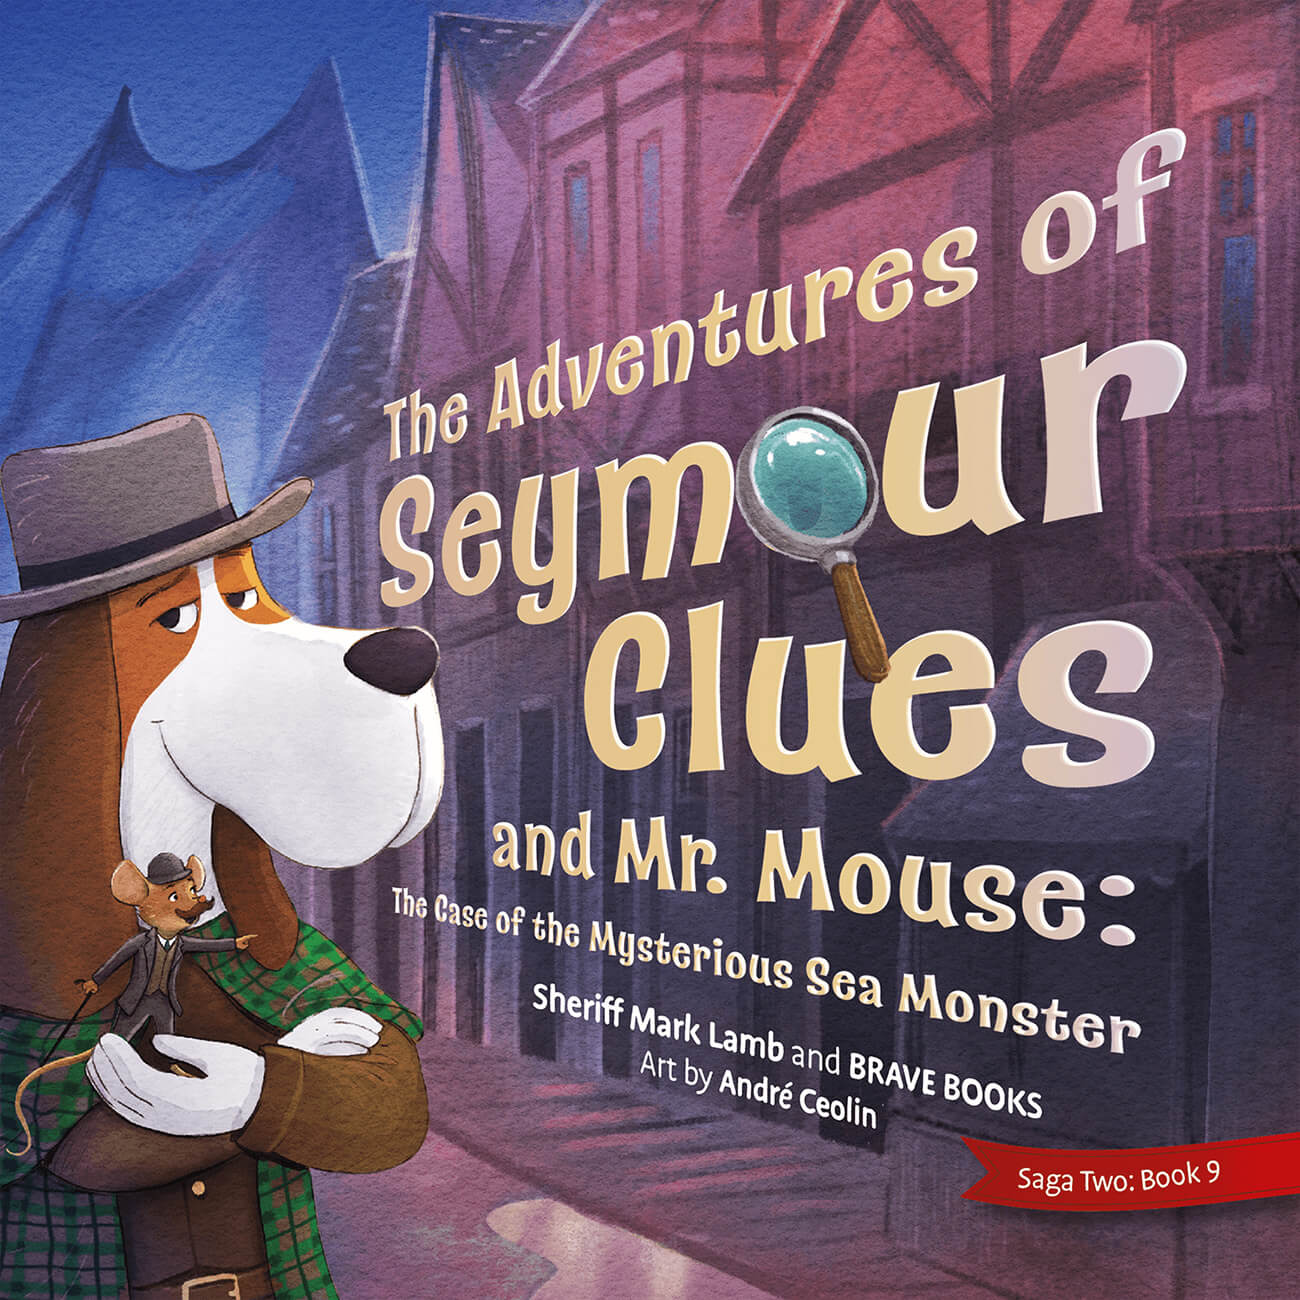 The Adventures of Seymour Clues & Mr. Mouse